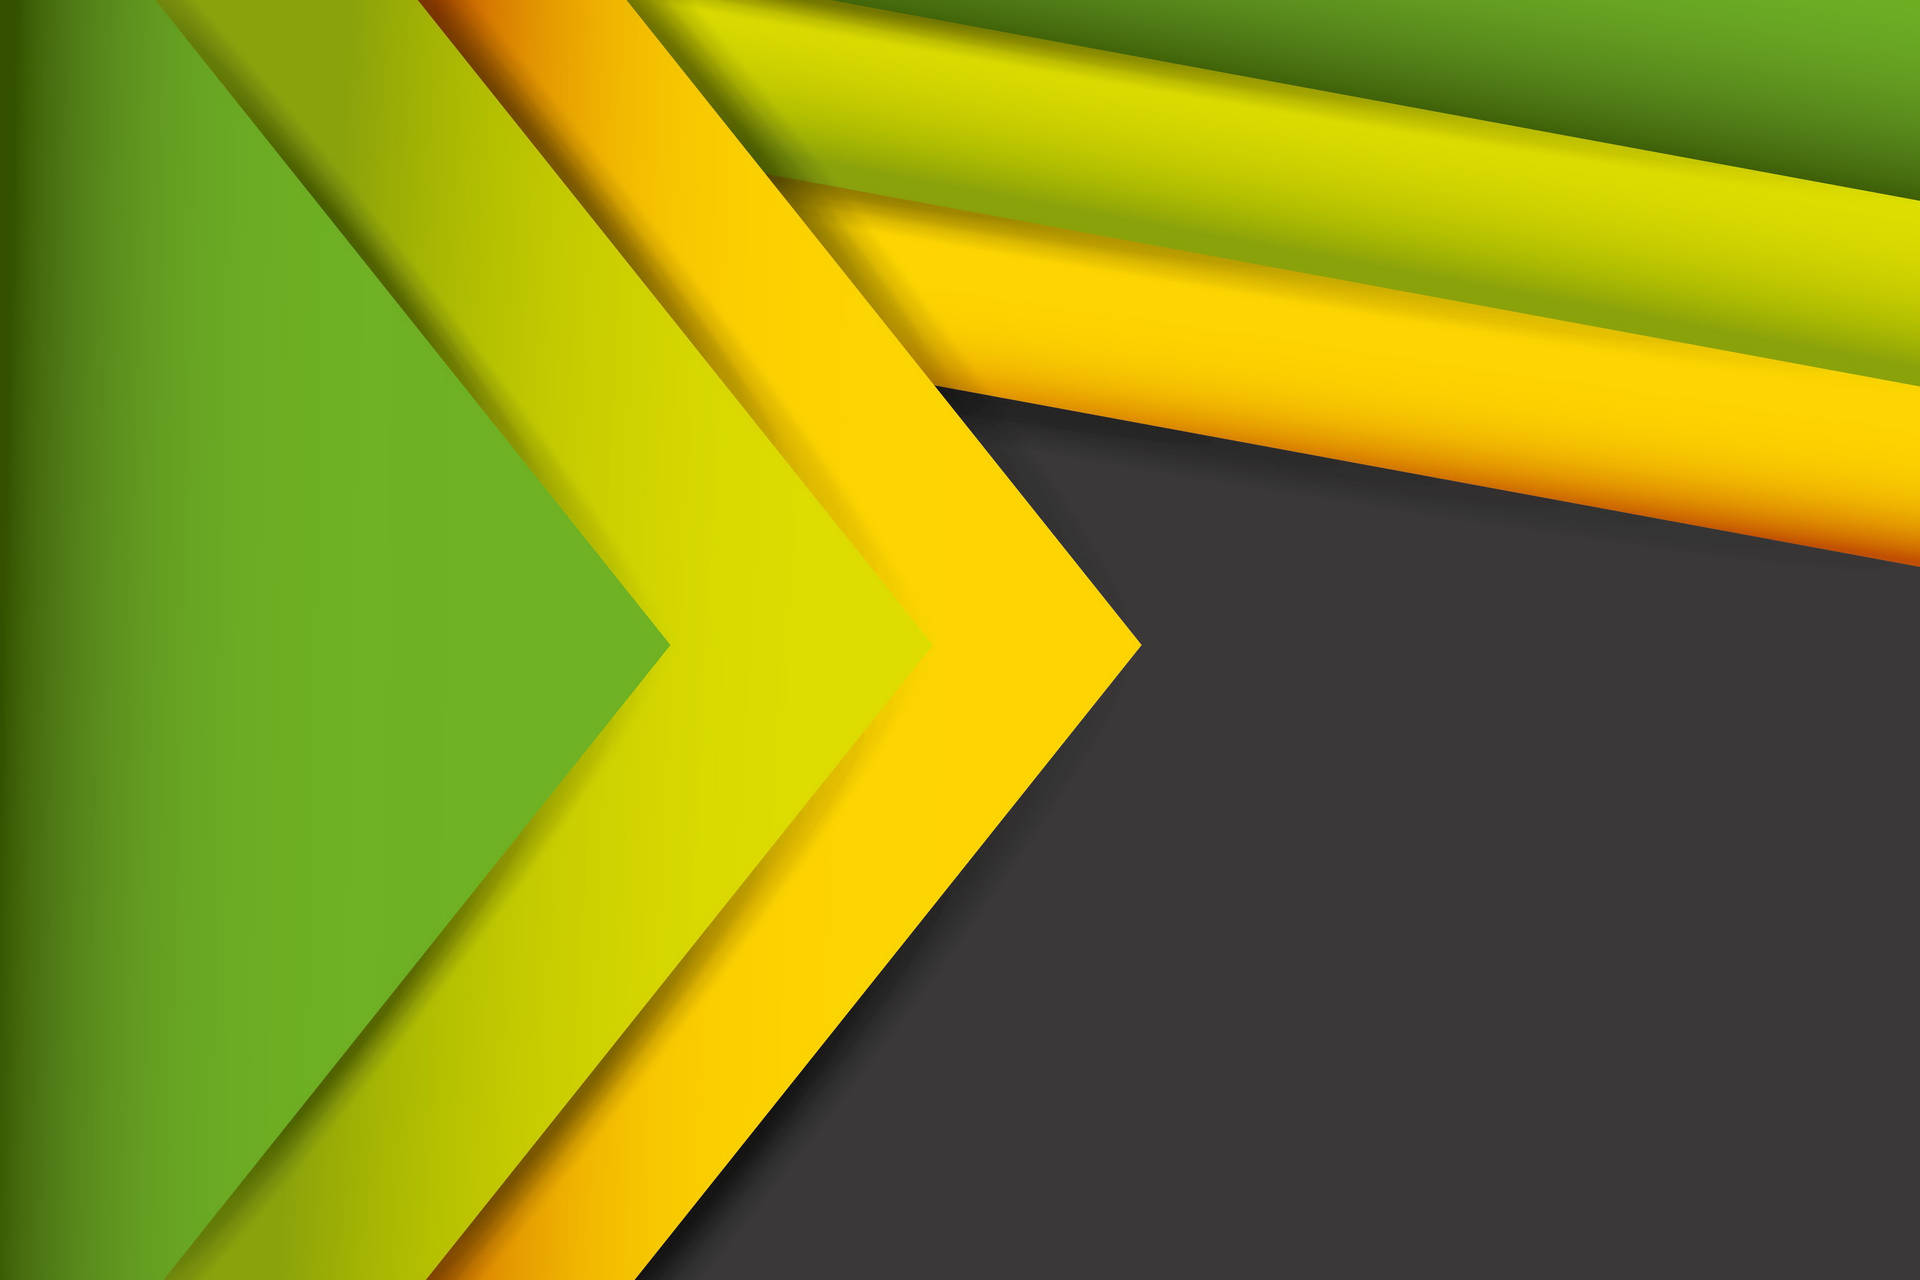 Geometric Yellow and Green Triangle Patterns Wallpaper